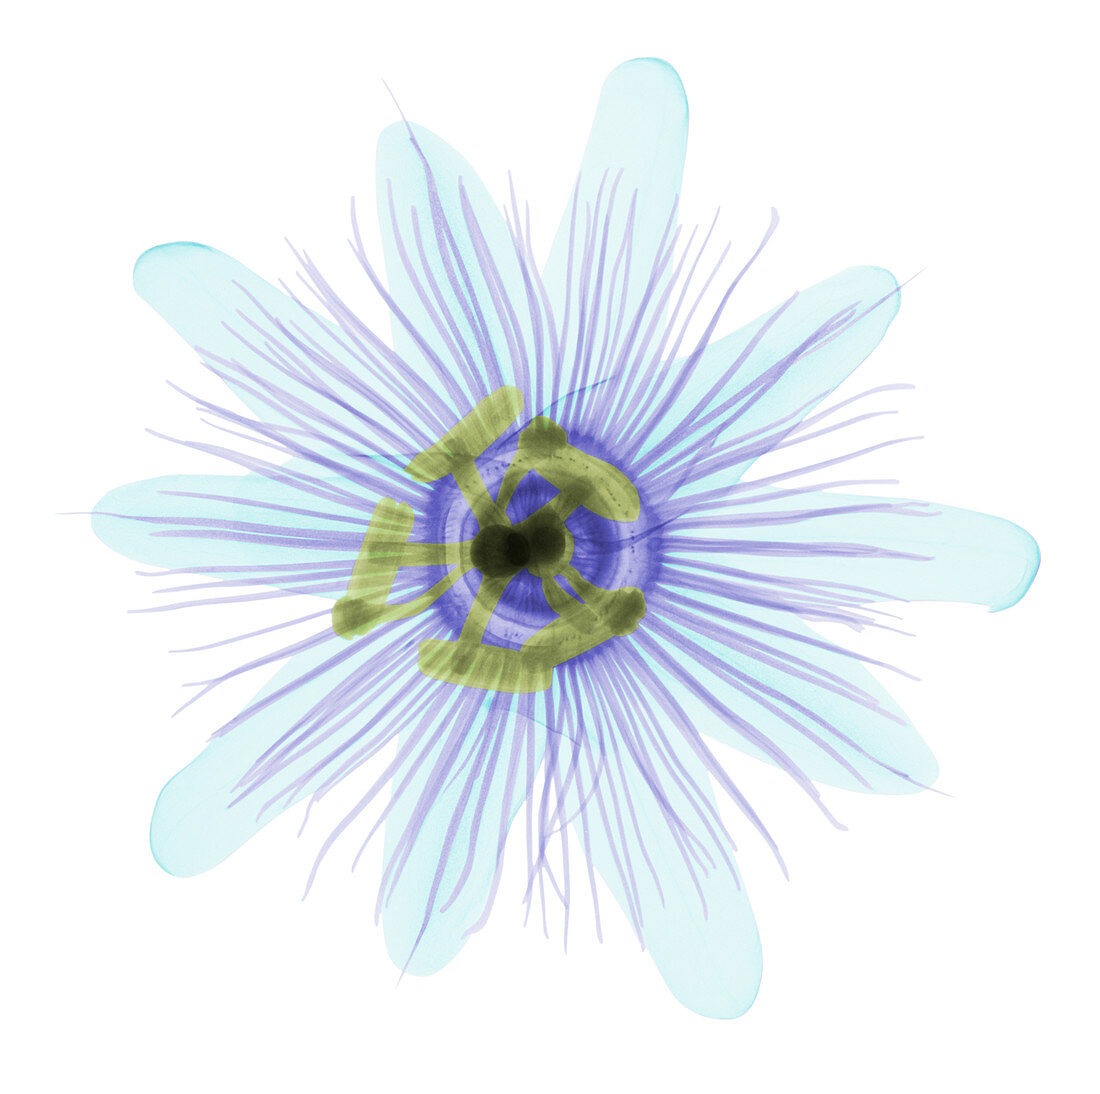 Passion Flower, X-ray